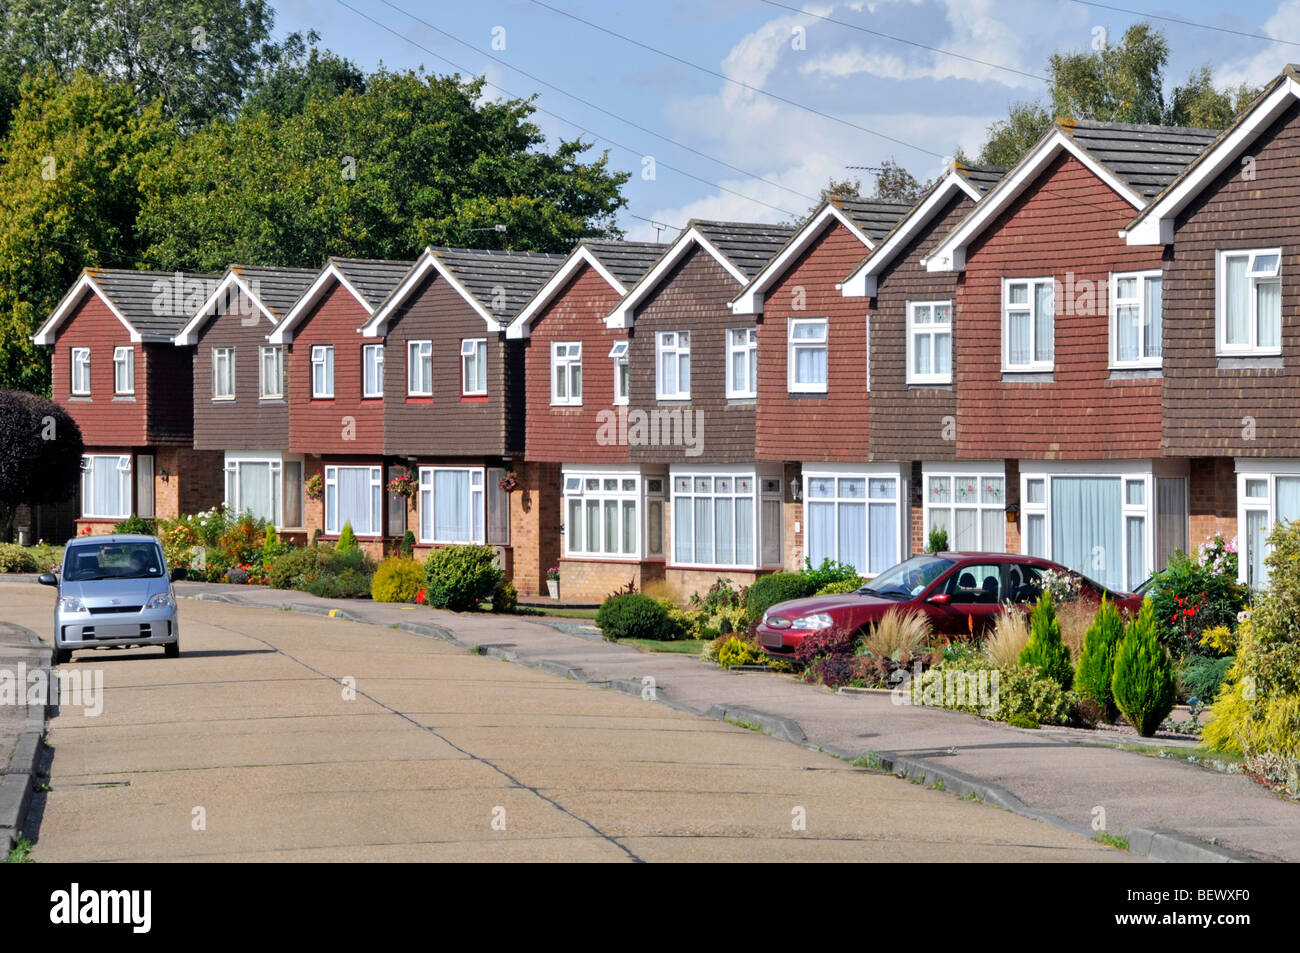 Row of homes in residential street of real estate housing property development identical detached houses individual gardens &  car driveway England UK Stock Photo